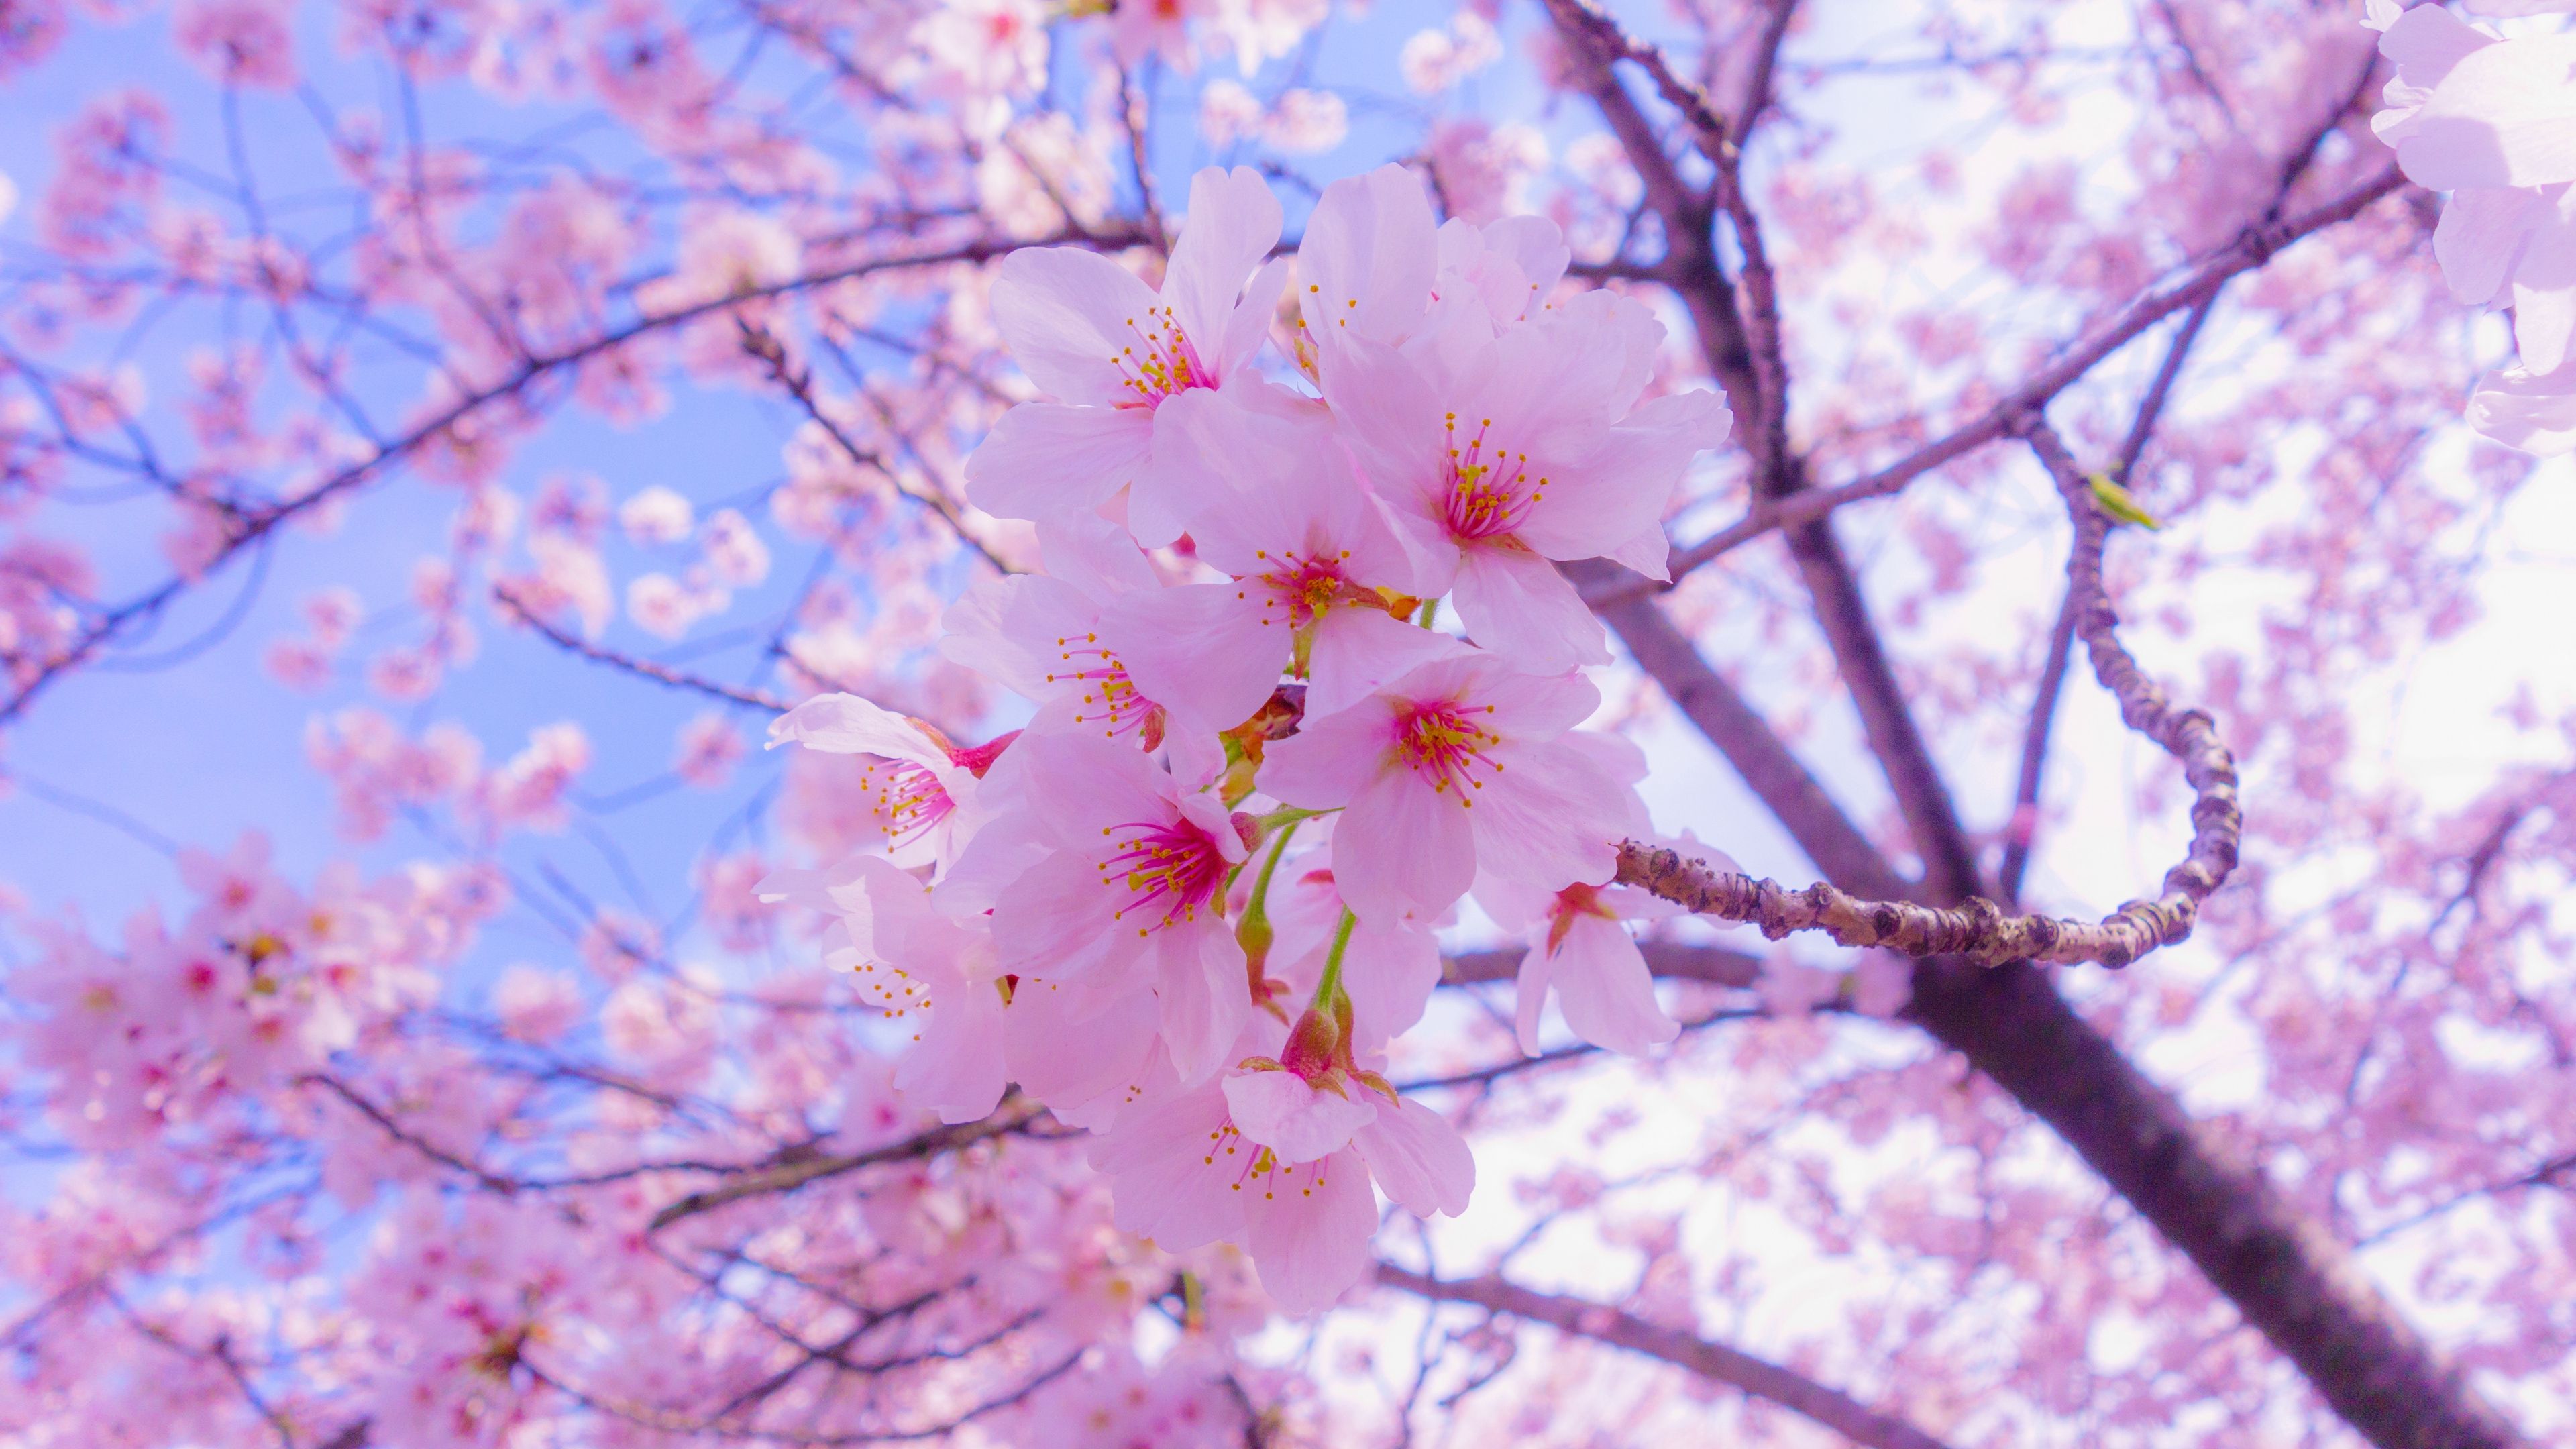 Sakura 4K wallpaper for your desktop or mobile screen free and easy to download